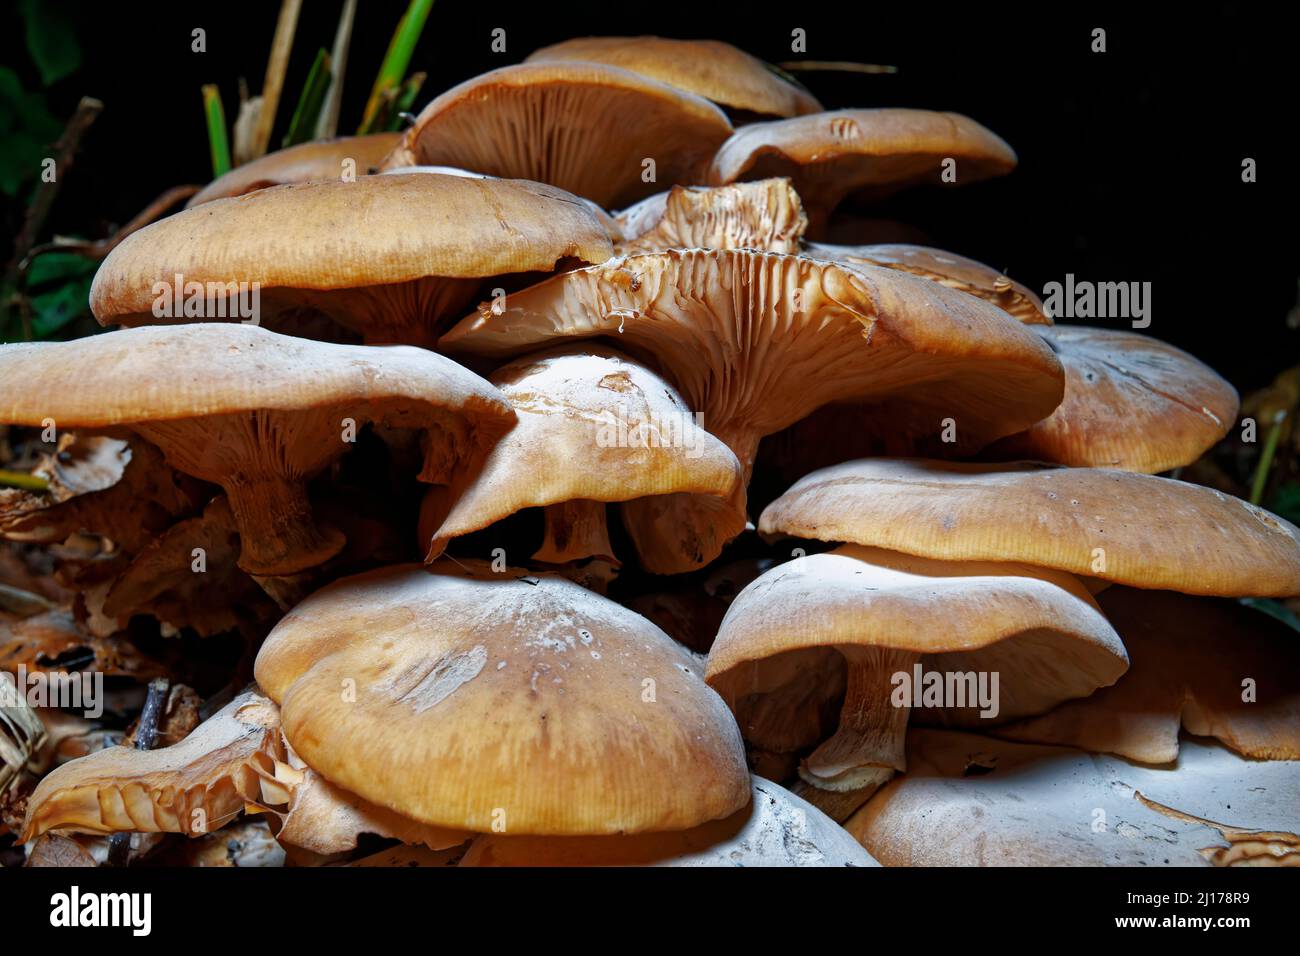 Large brown fungi in an English garden in late autumn to early winter with damage from being eaten by slugs photographed at night Stock Photo